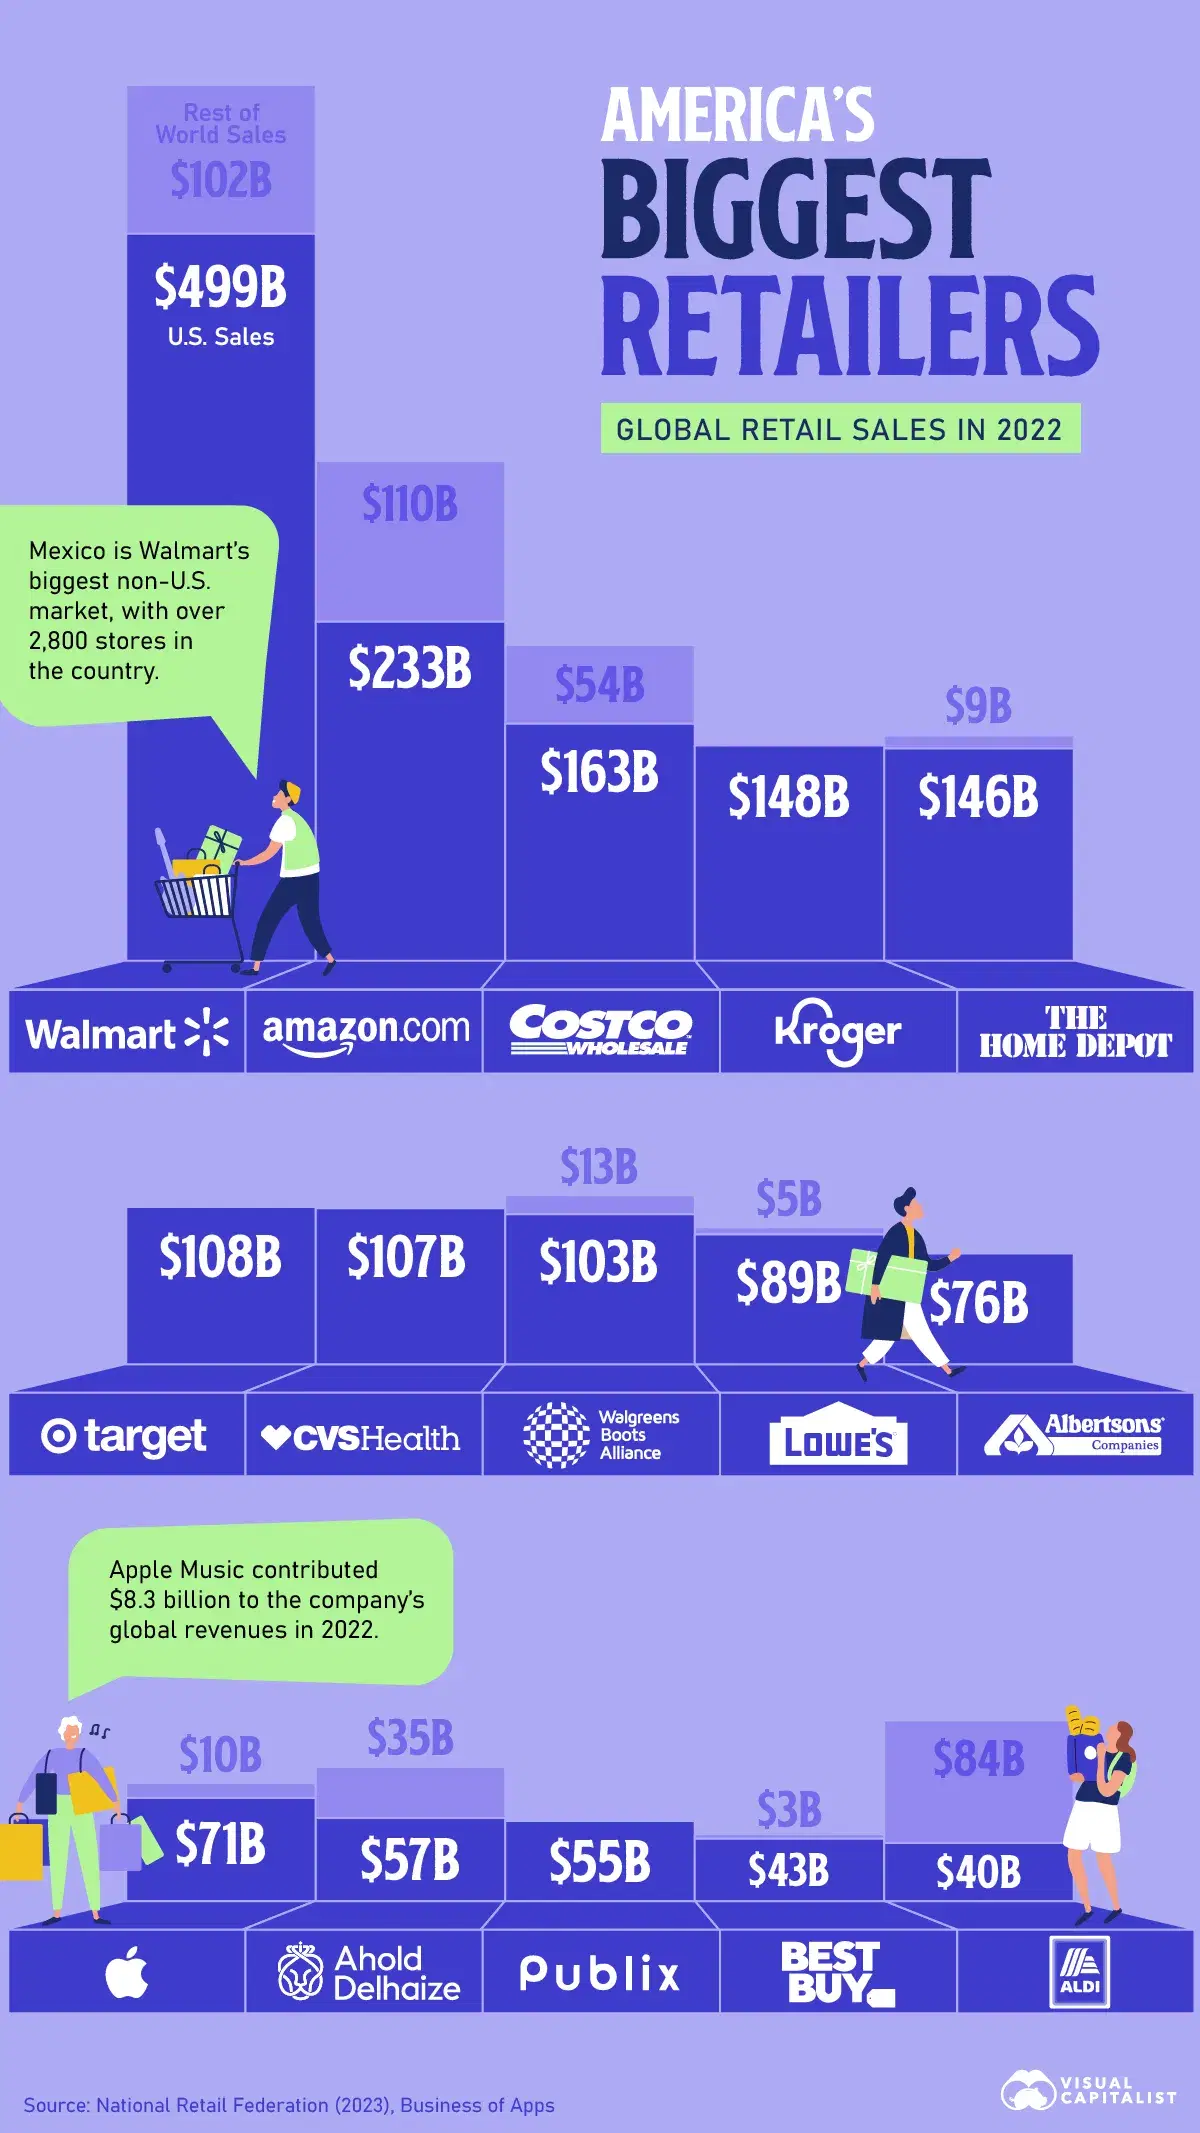 The Top 15 Retailers in America